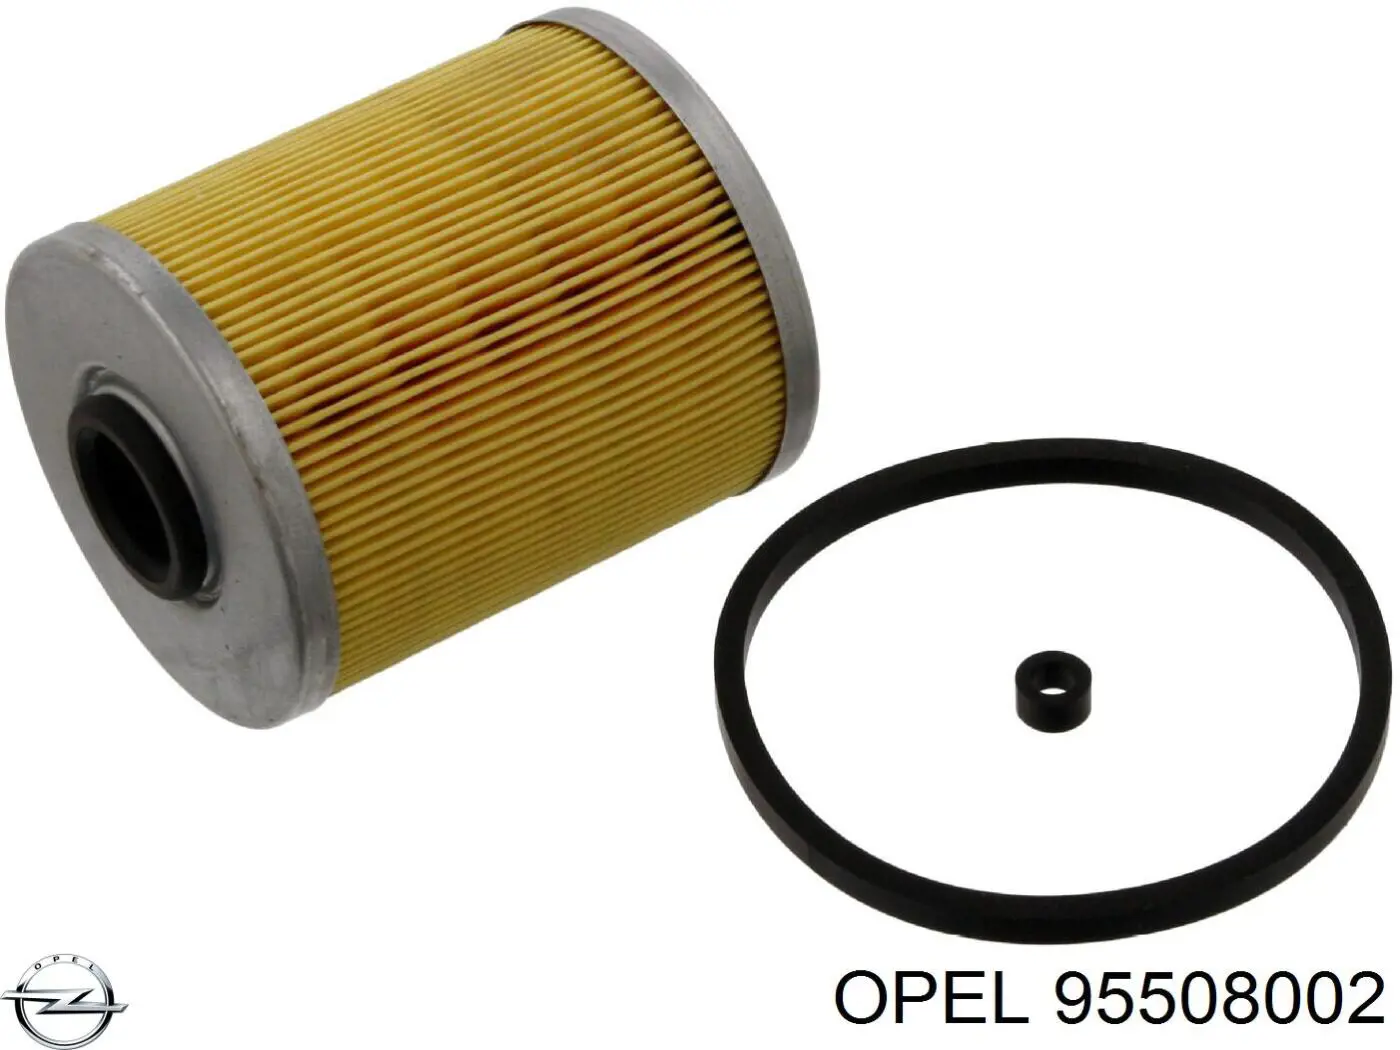 95508002 Opel filtro combustible